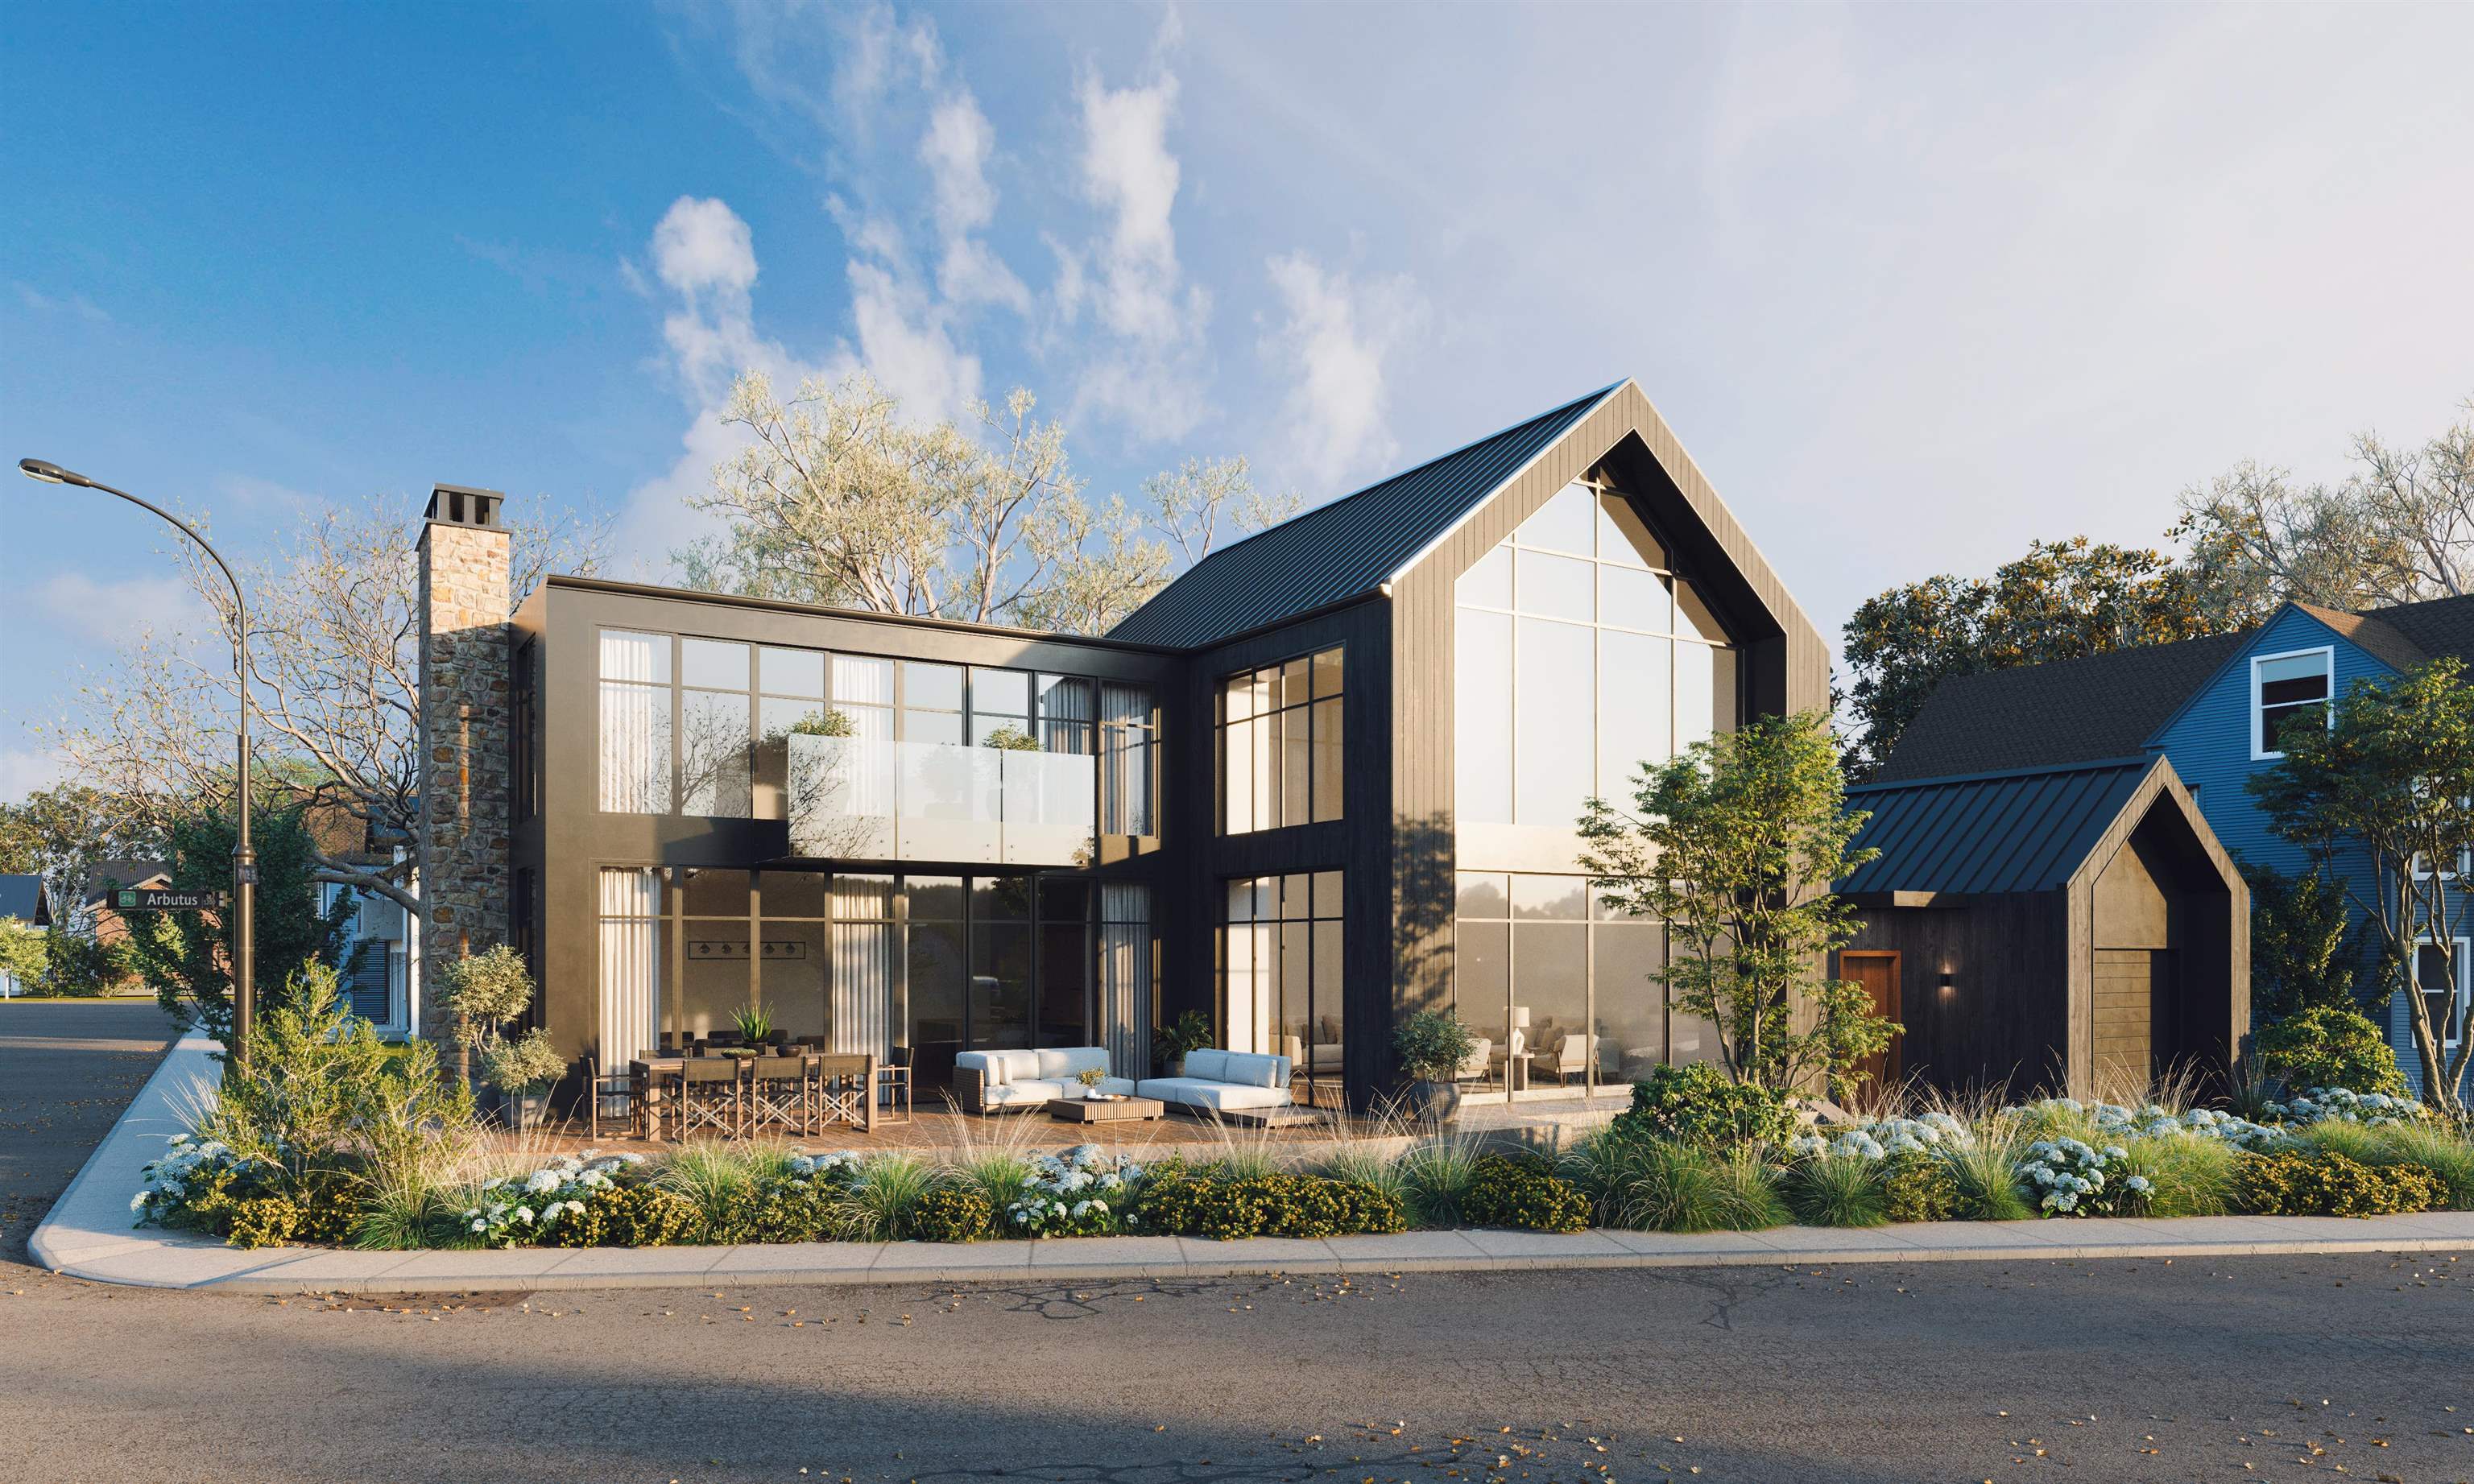 Note- this rendering is for inspiration purposes only. Buyer to do due diligence with the COV regarding zoning and building requirements. The listing agent makes no representations of warranties thereof.